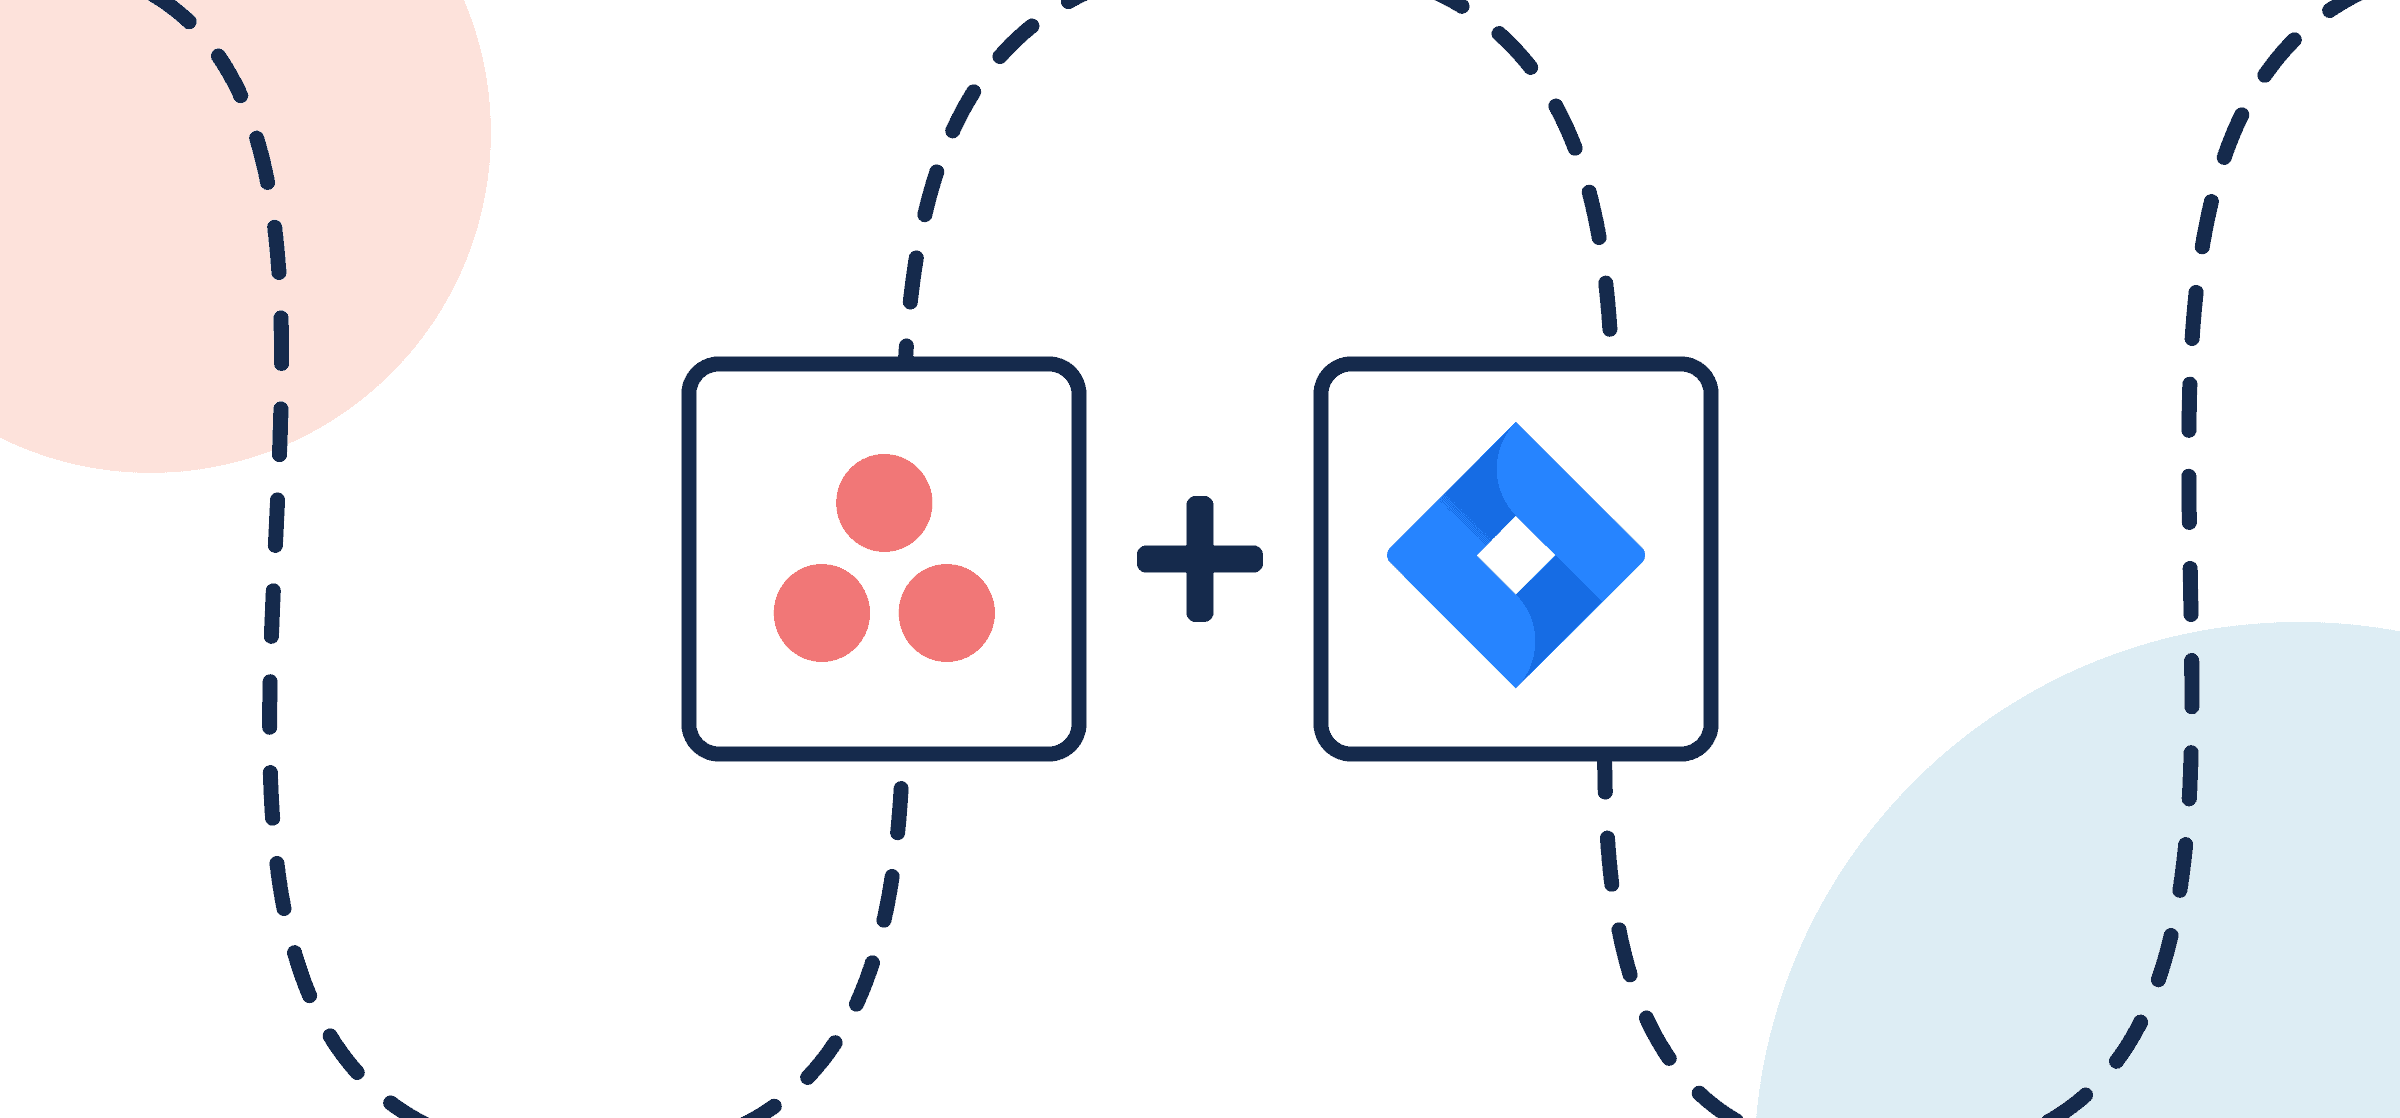 Featured image displaying the logos of Jira and Asana in Unito's guide to setting up a simple Two-Way Sync